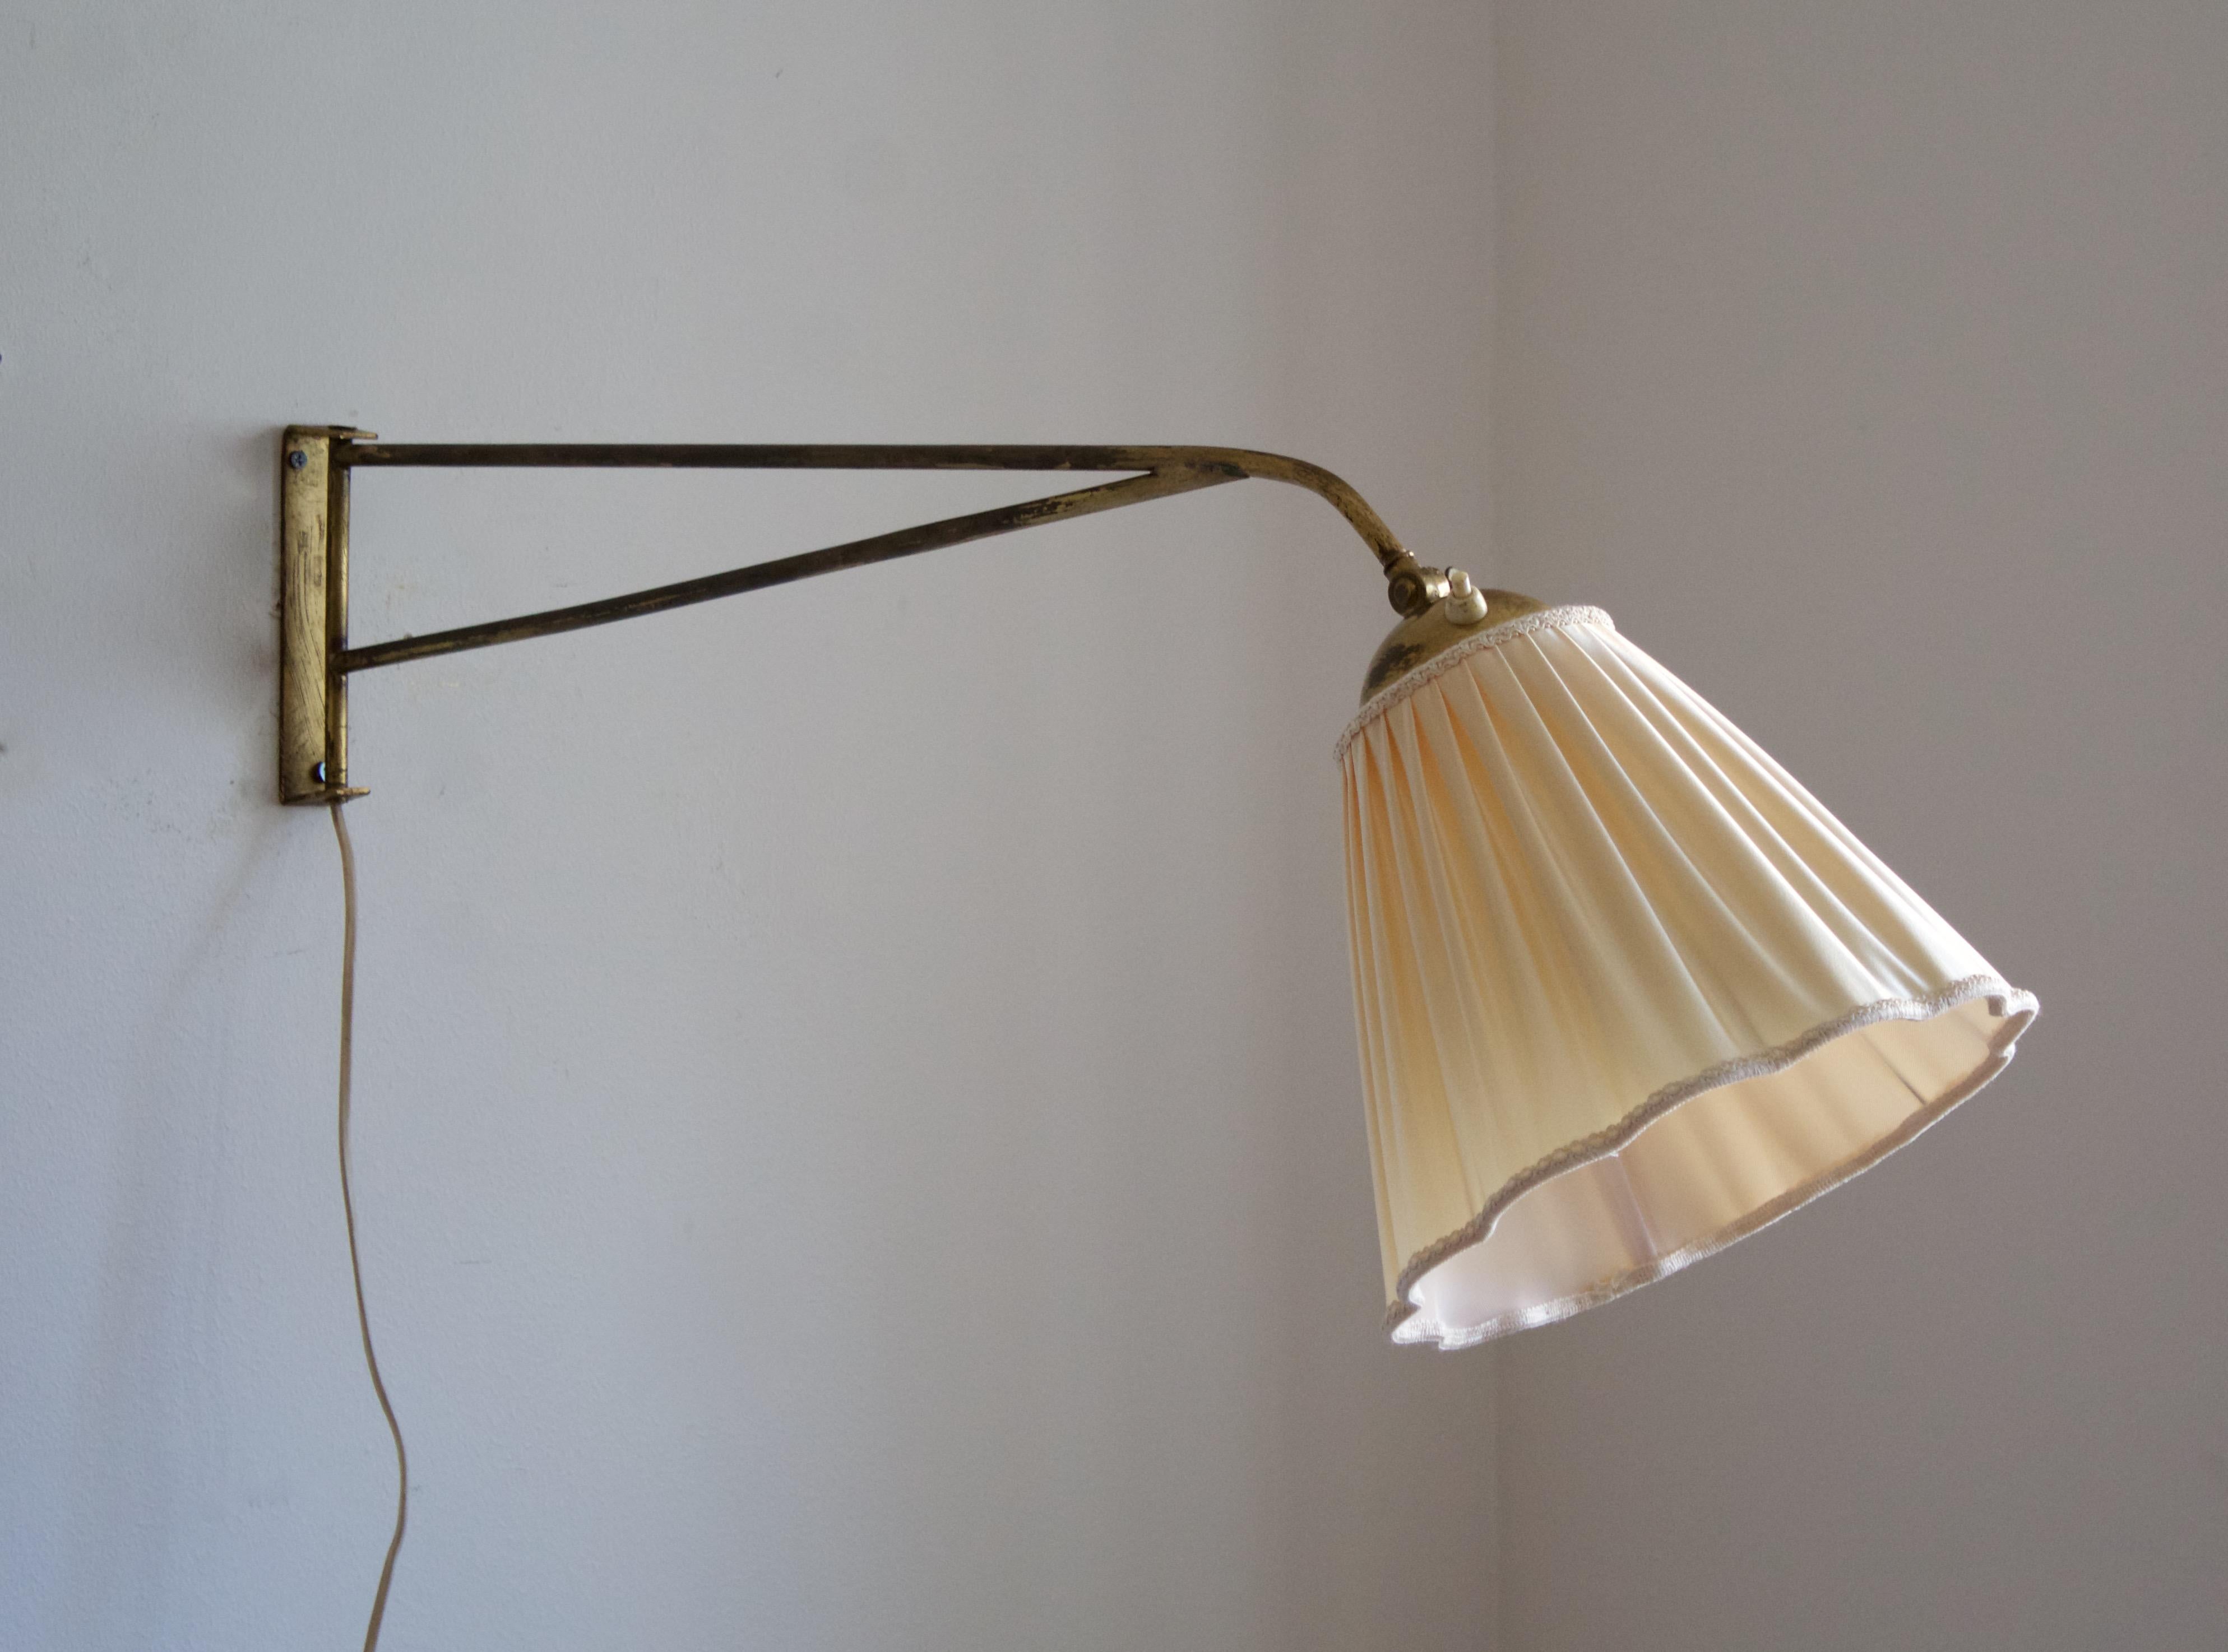 A functionalist wall light / task light, designed and produced in Sweden, 1940s. Features brass. Original fabric lampshade.

Stated dimensions with lampshade attached as is illustrated in the primary image.